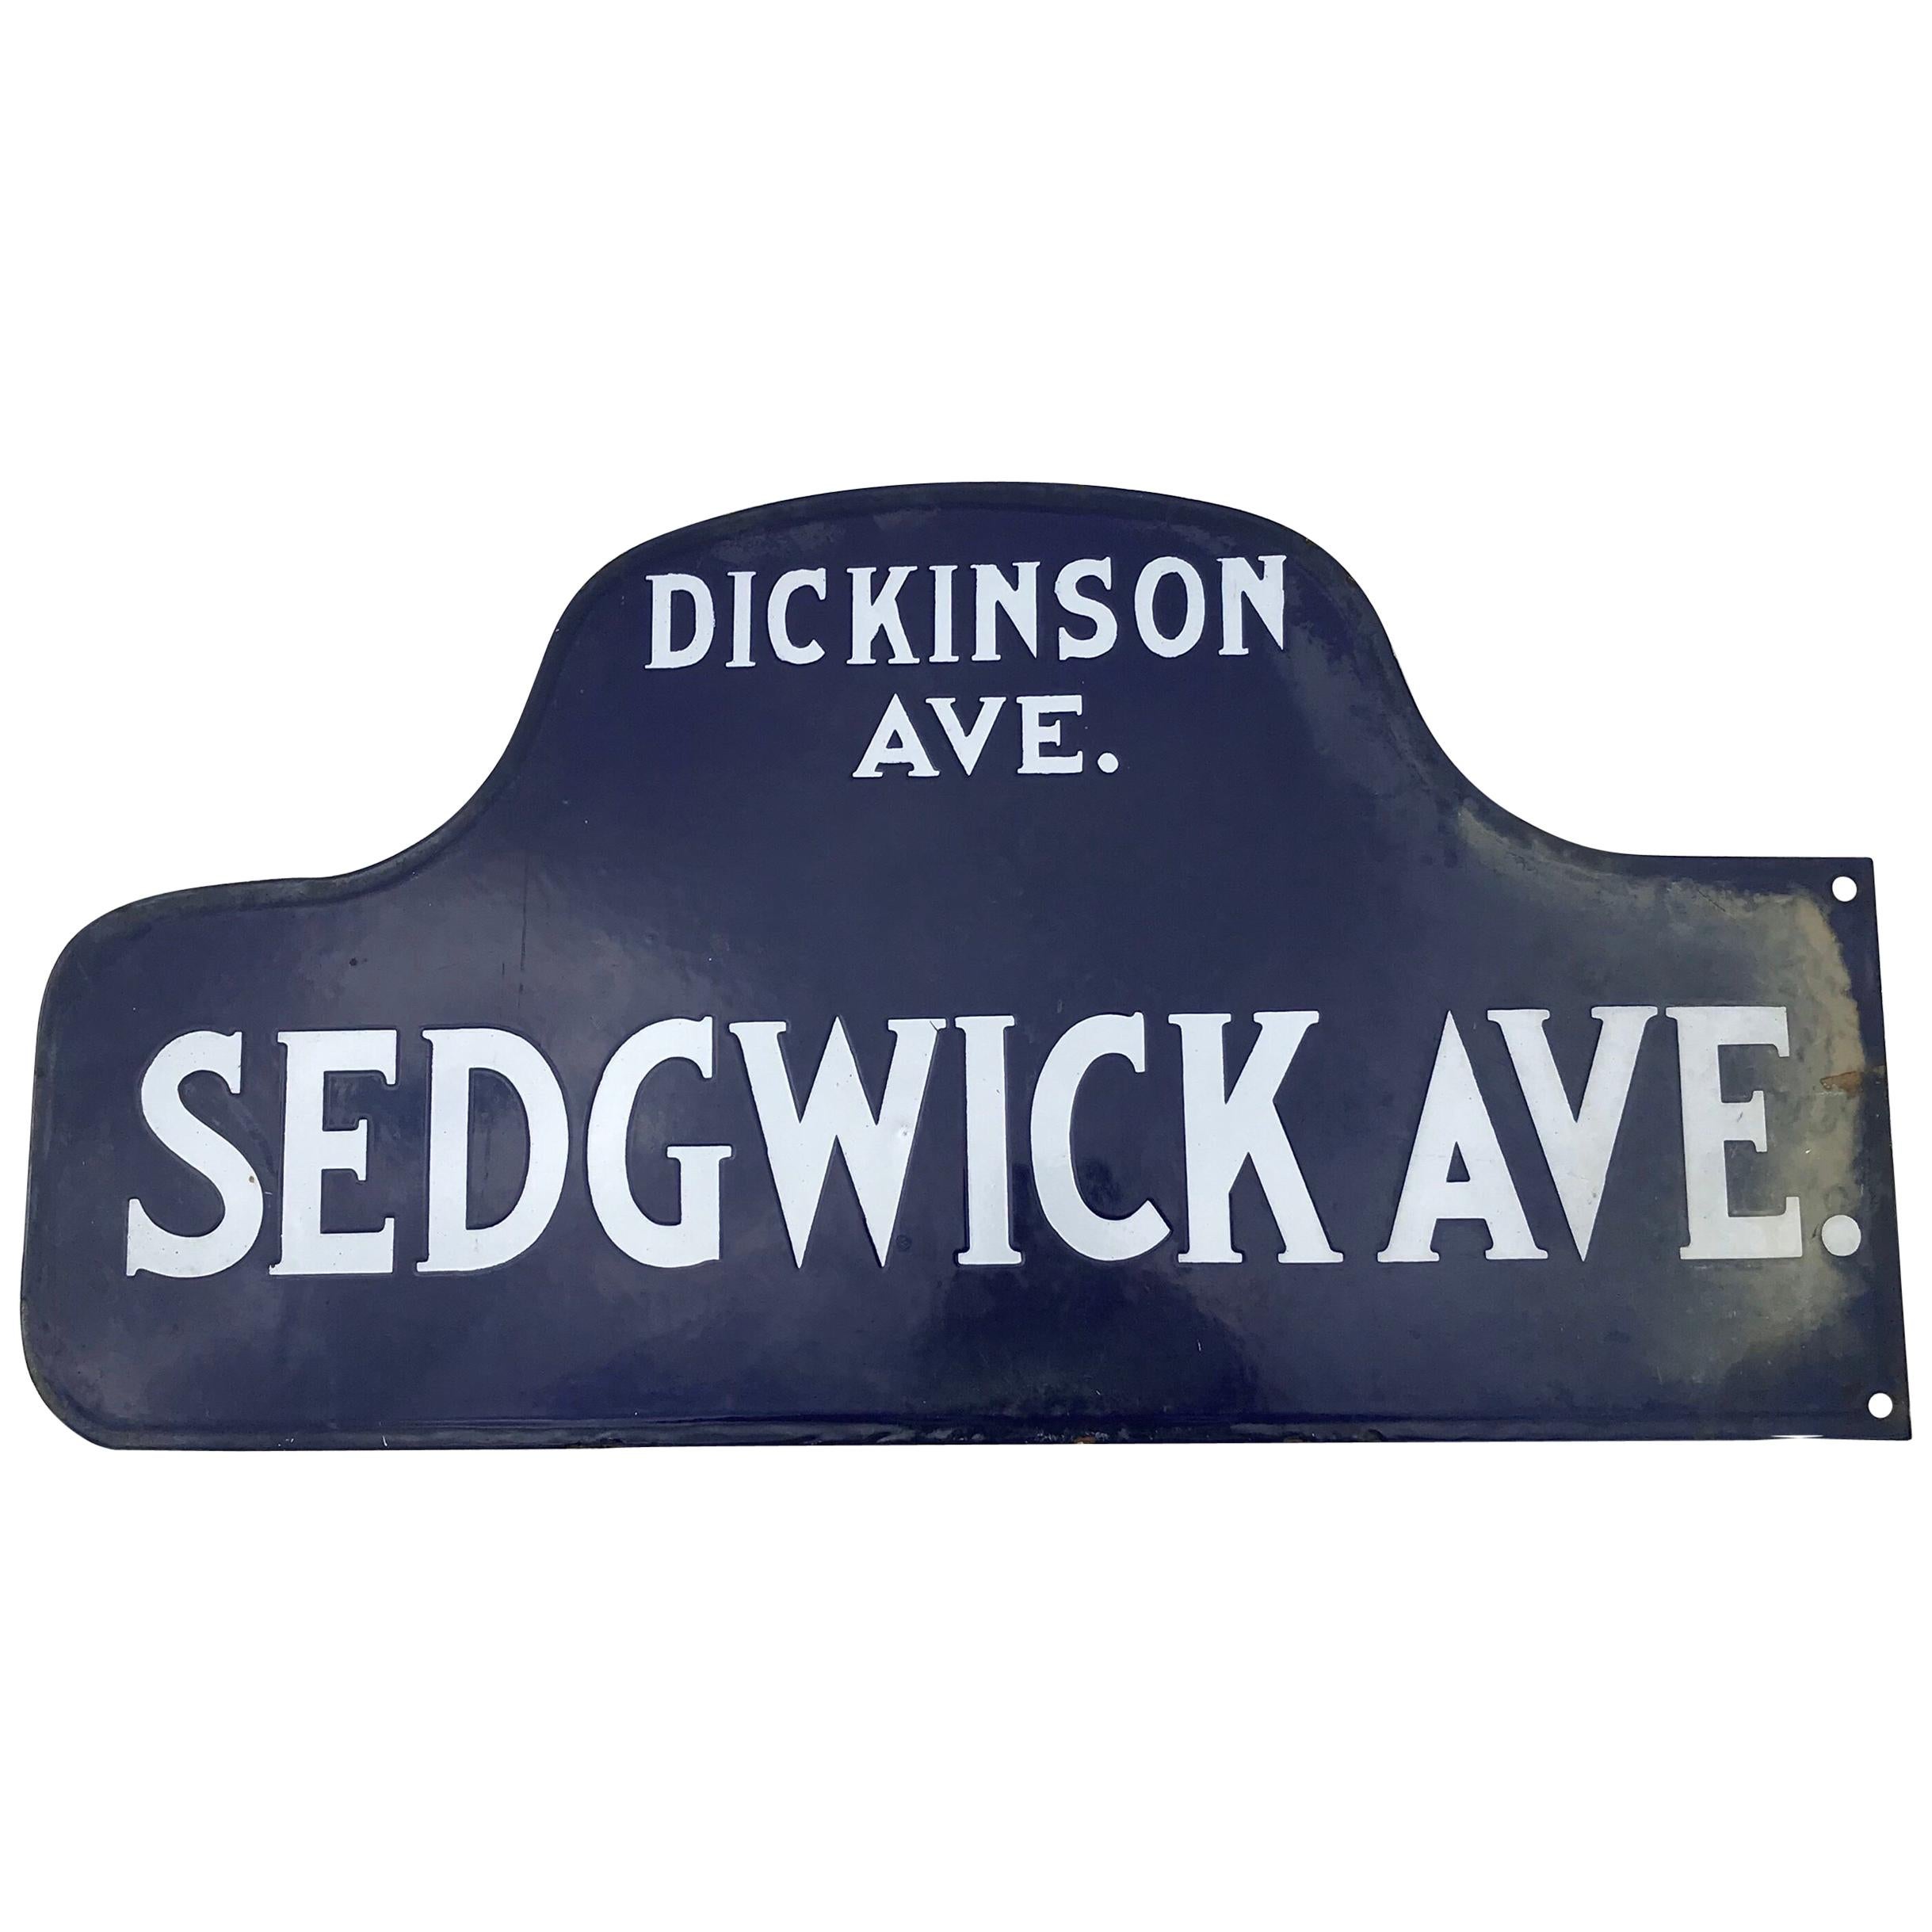 Antique Porcelain Humpback Double Sided NYC Street Sign